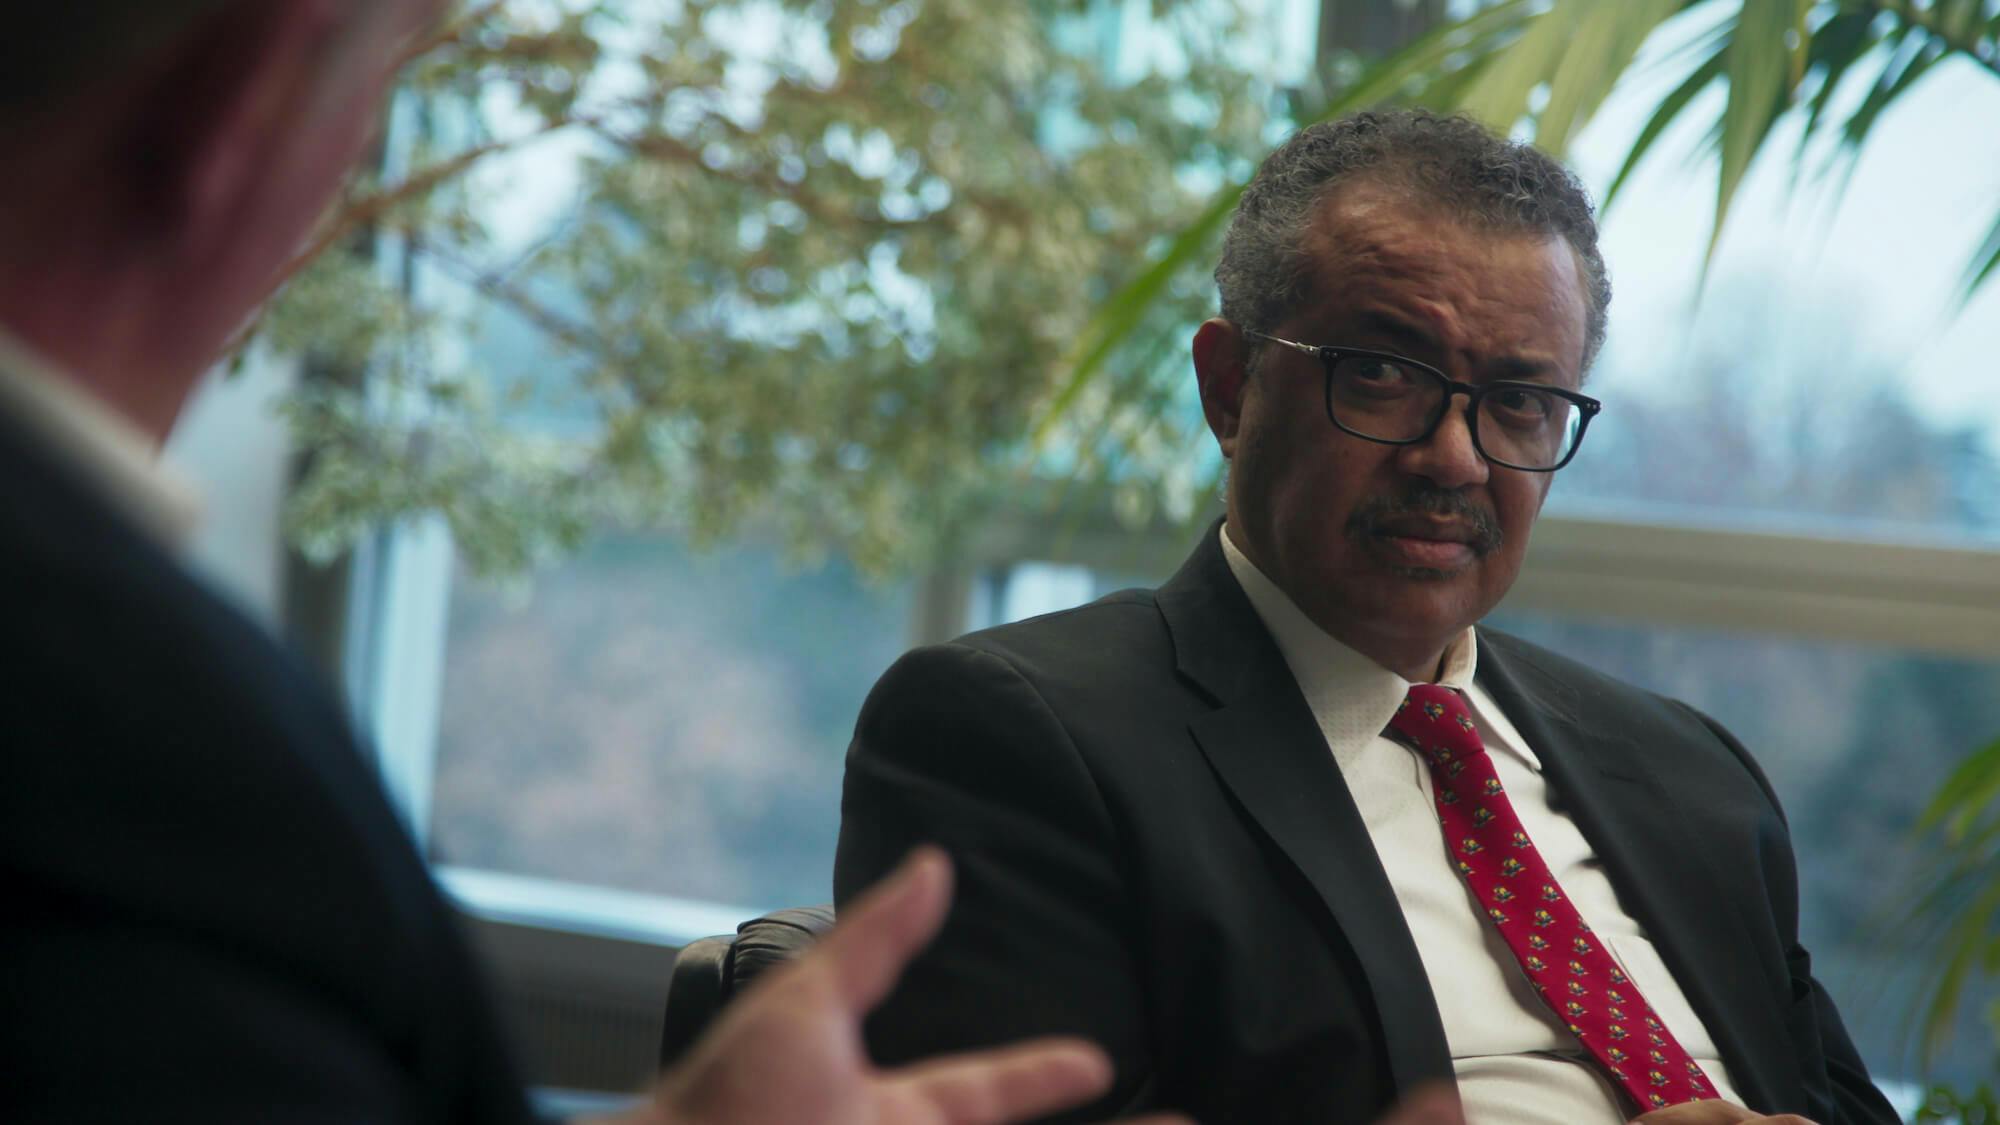 Dr. Tedros Adhanom Ghebreyesus speaks to someone off-camera and wears a dark suit, white shirt, glasses and red tie.